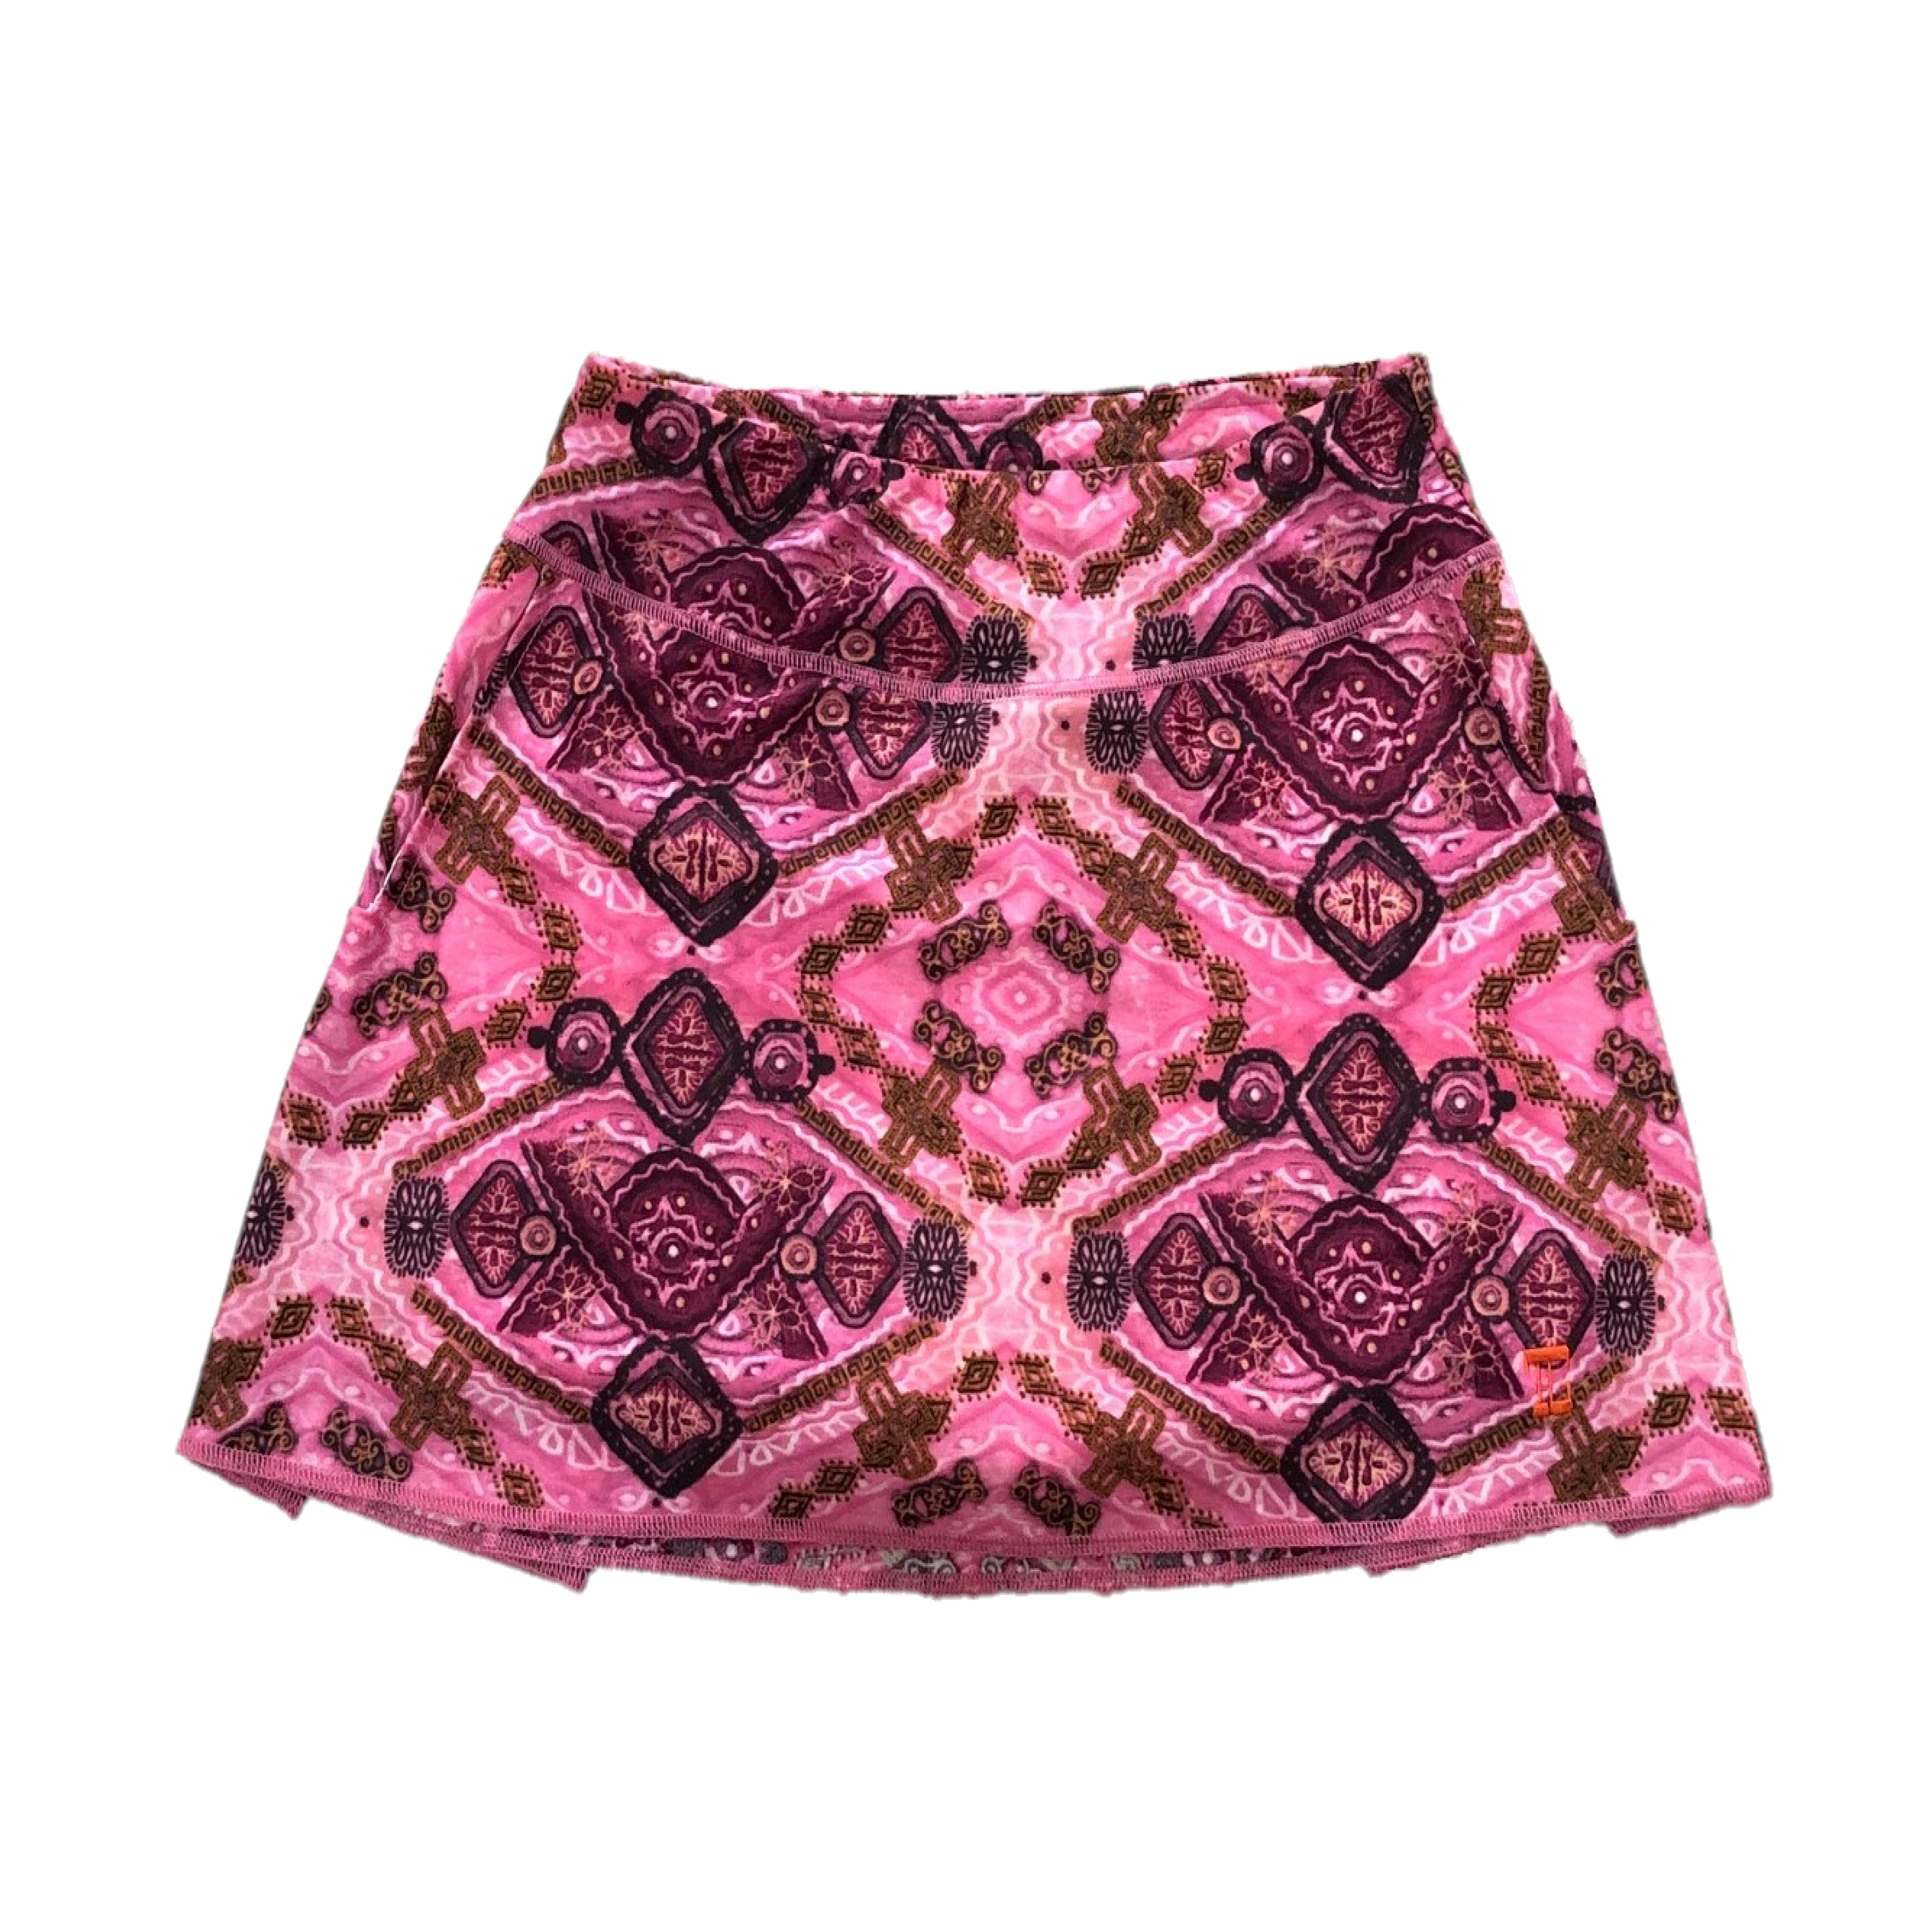 LS-037A || Ladies Skirt Pale Fawn Pink with Dark Brown Motif.